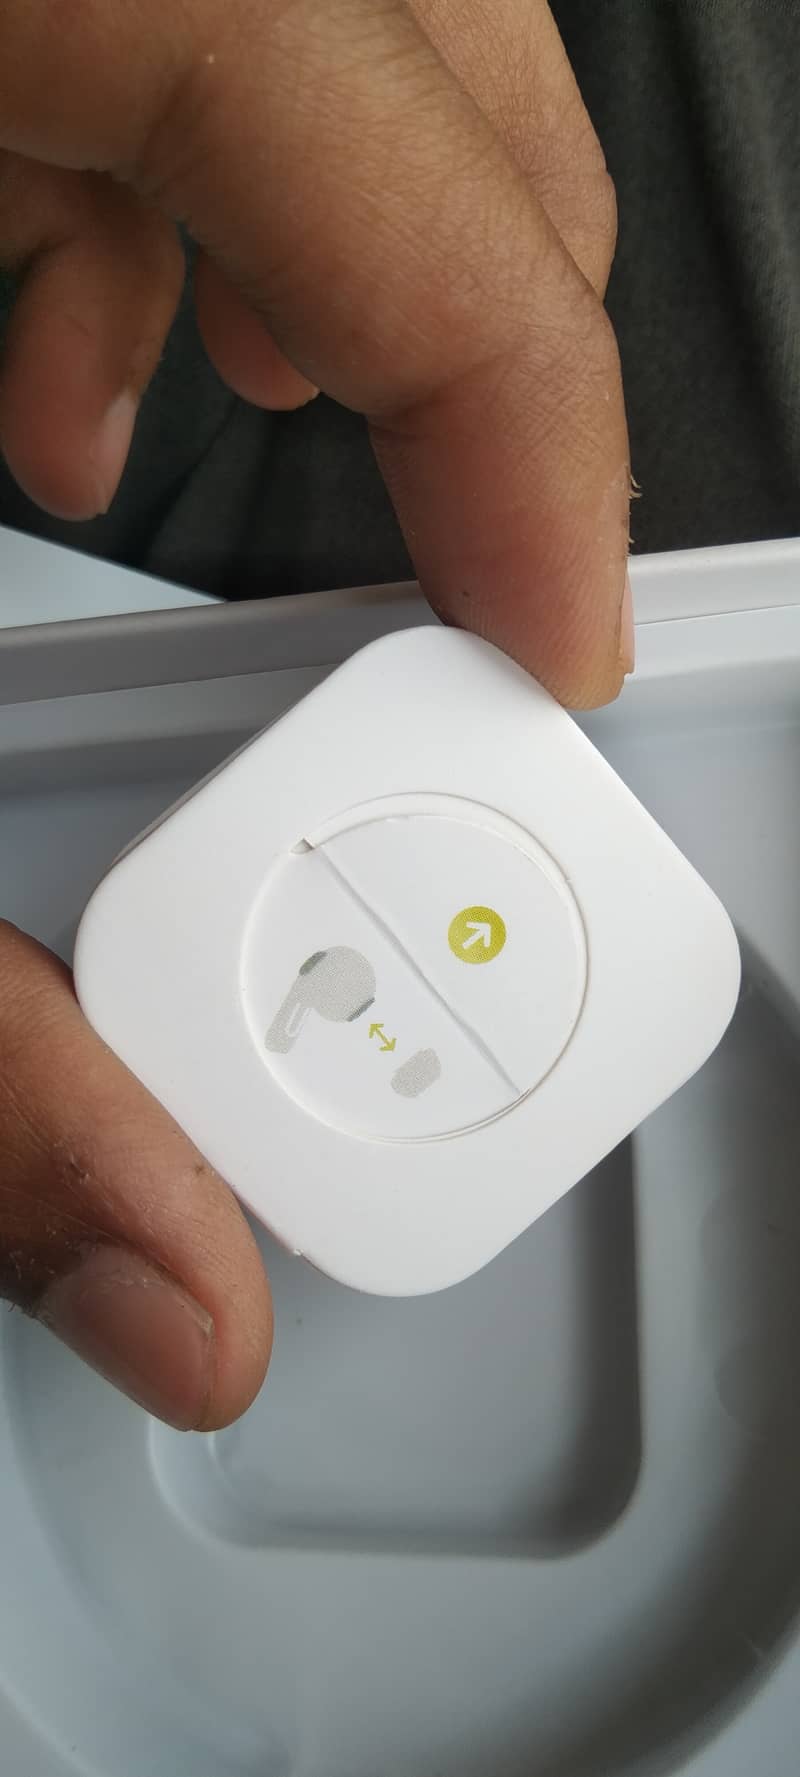 Apple Airpods pro for sale in new condition. 3